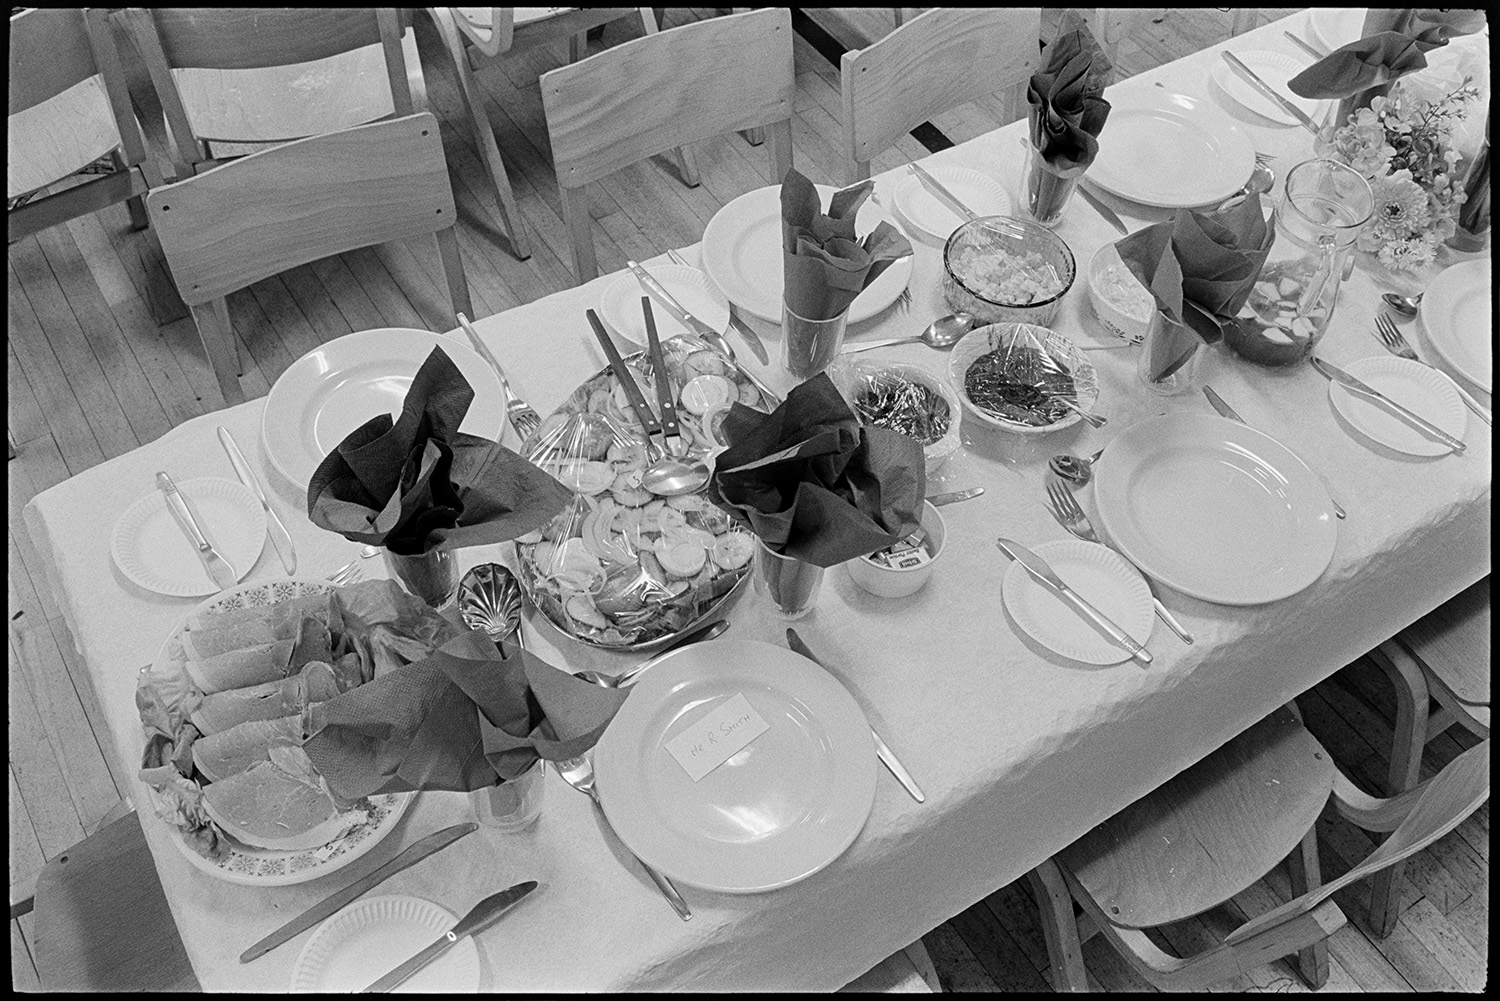 Women preparing supper, dinner in village hall, details of place settings, china, cutlery.
[A table laid for dinner at Winkleigh Village Hall, possibly for an Over 60s Club dinner. China, glasses with serviettes, cutlery, and some covered plates of food, including cold meats, are visible.]